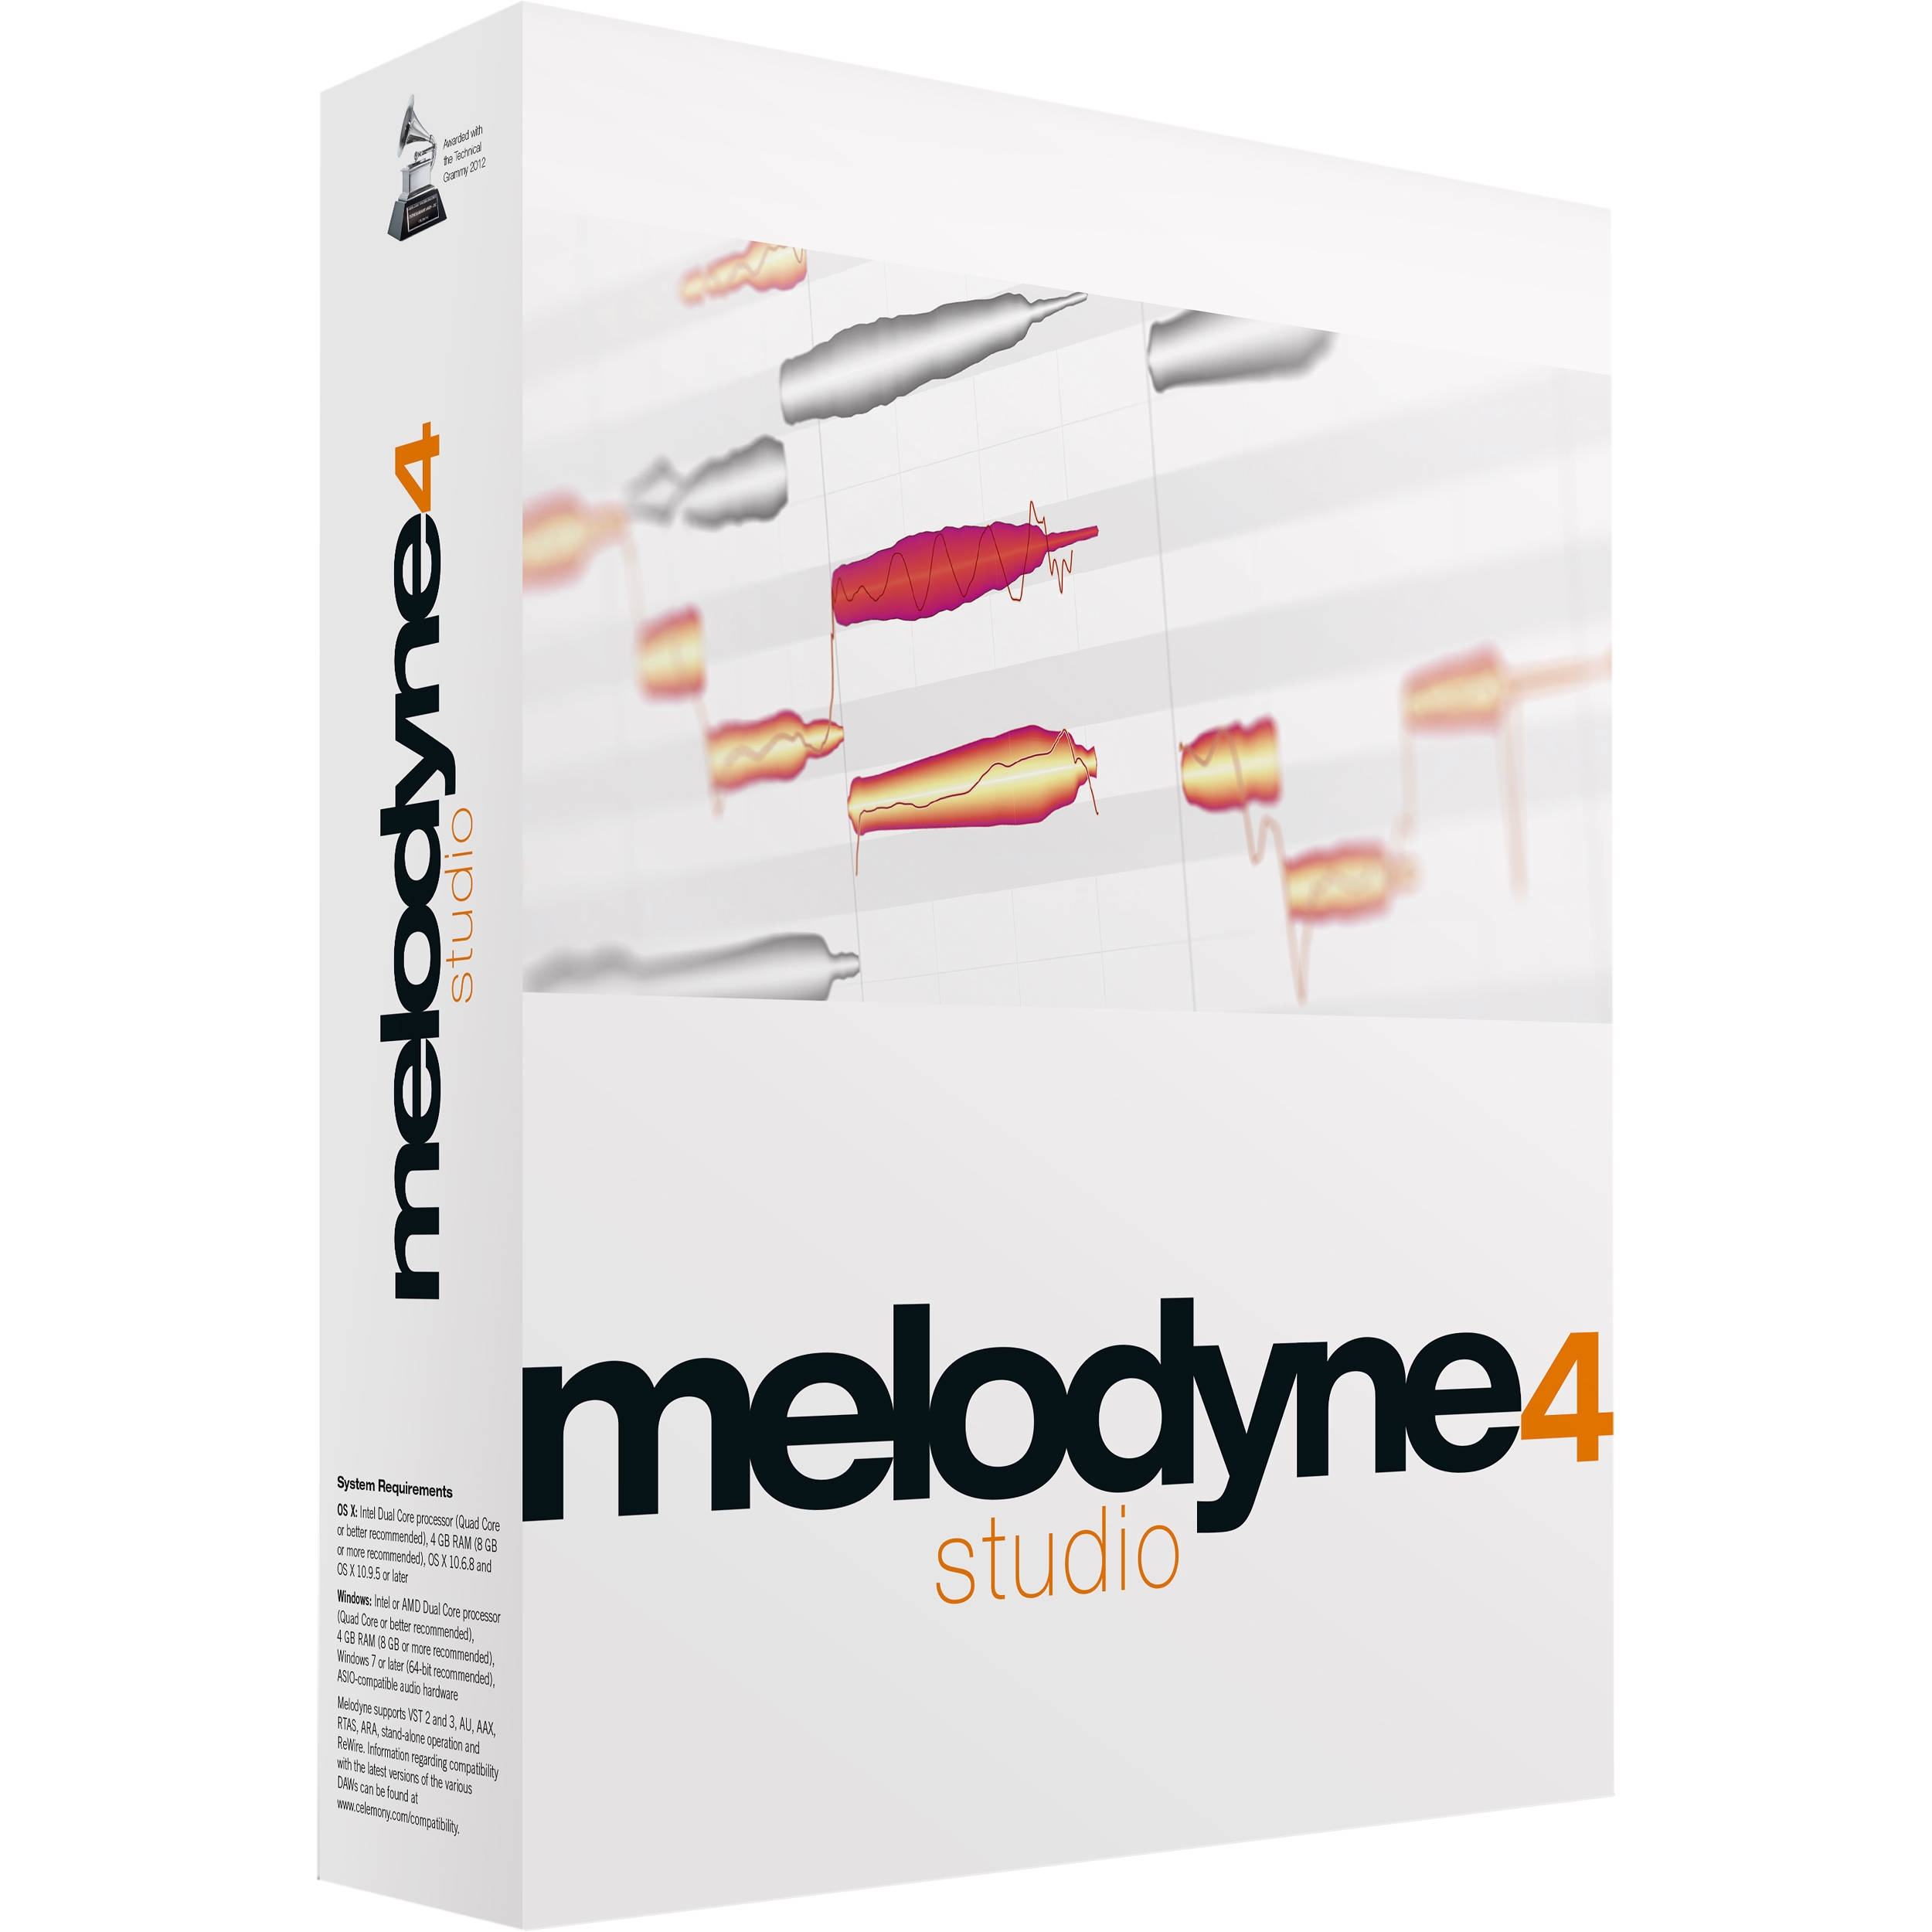 Celemony Melodyne 2020 Torrent +Crack With Serial Numbers Free